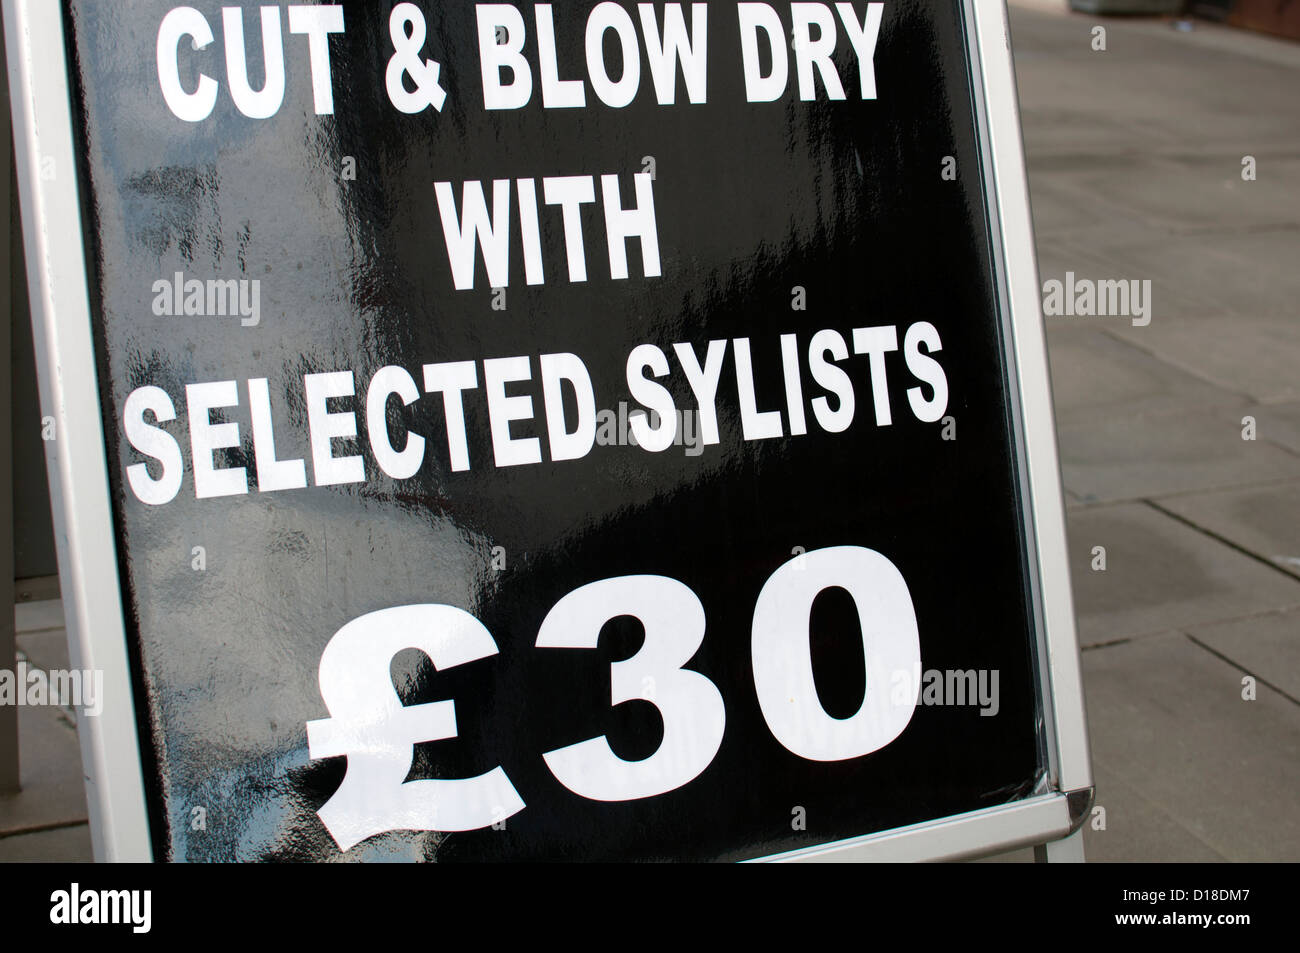 Spelling mistake, sylists instead of stylists Stock Photo